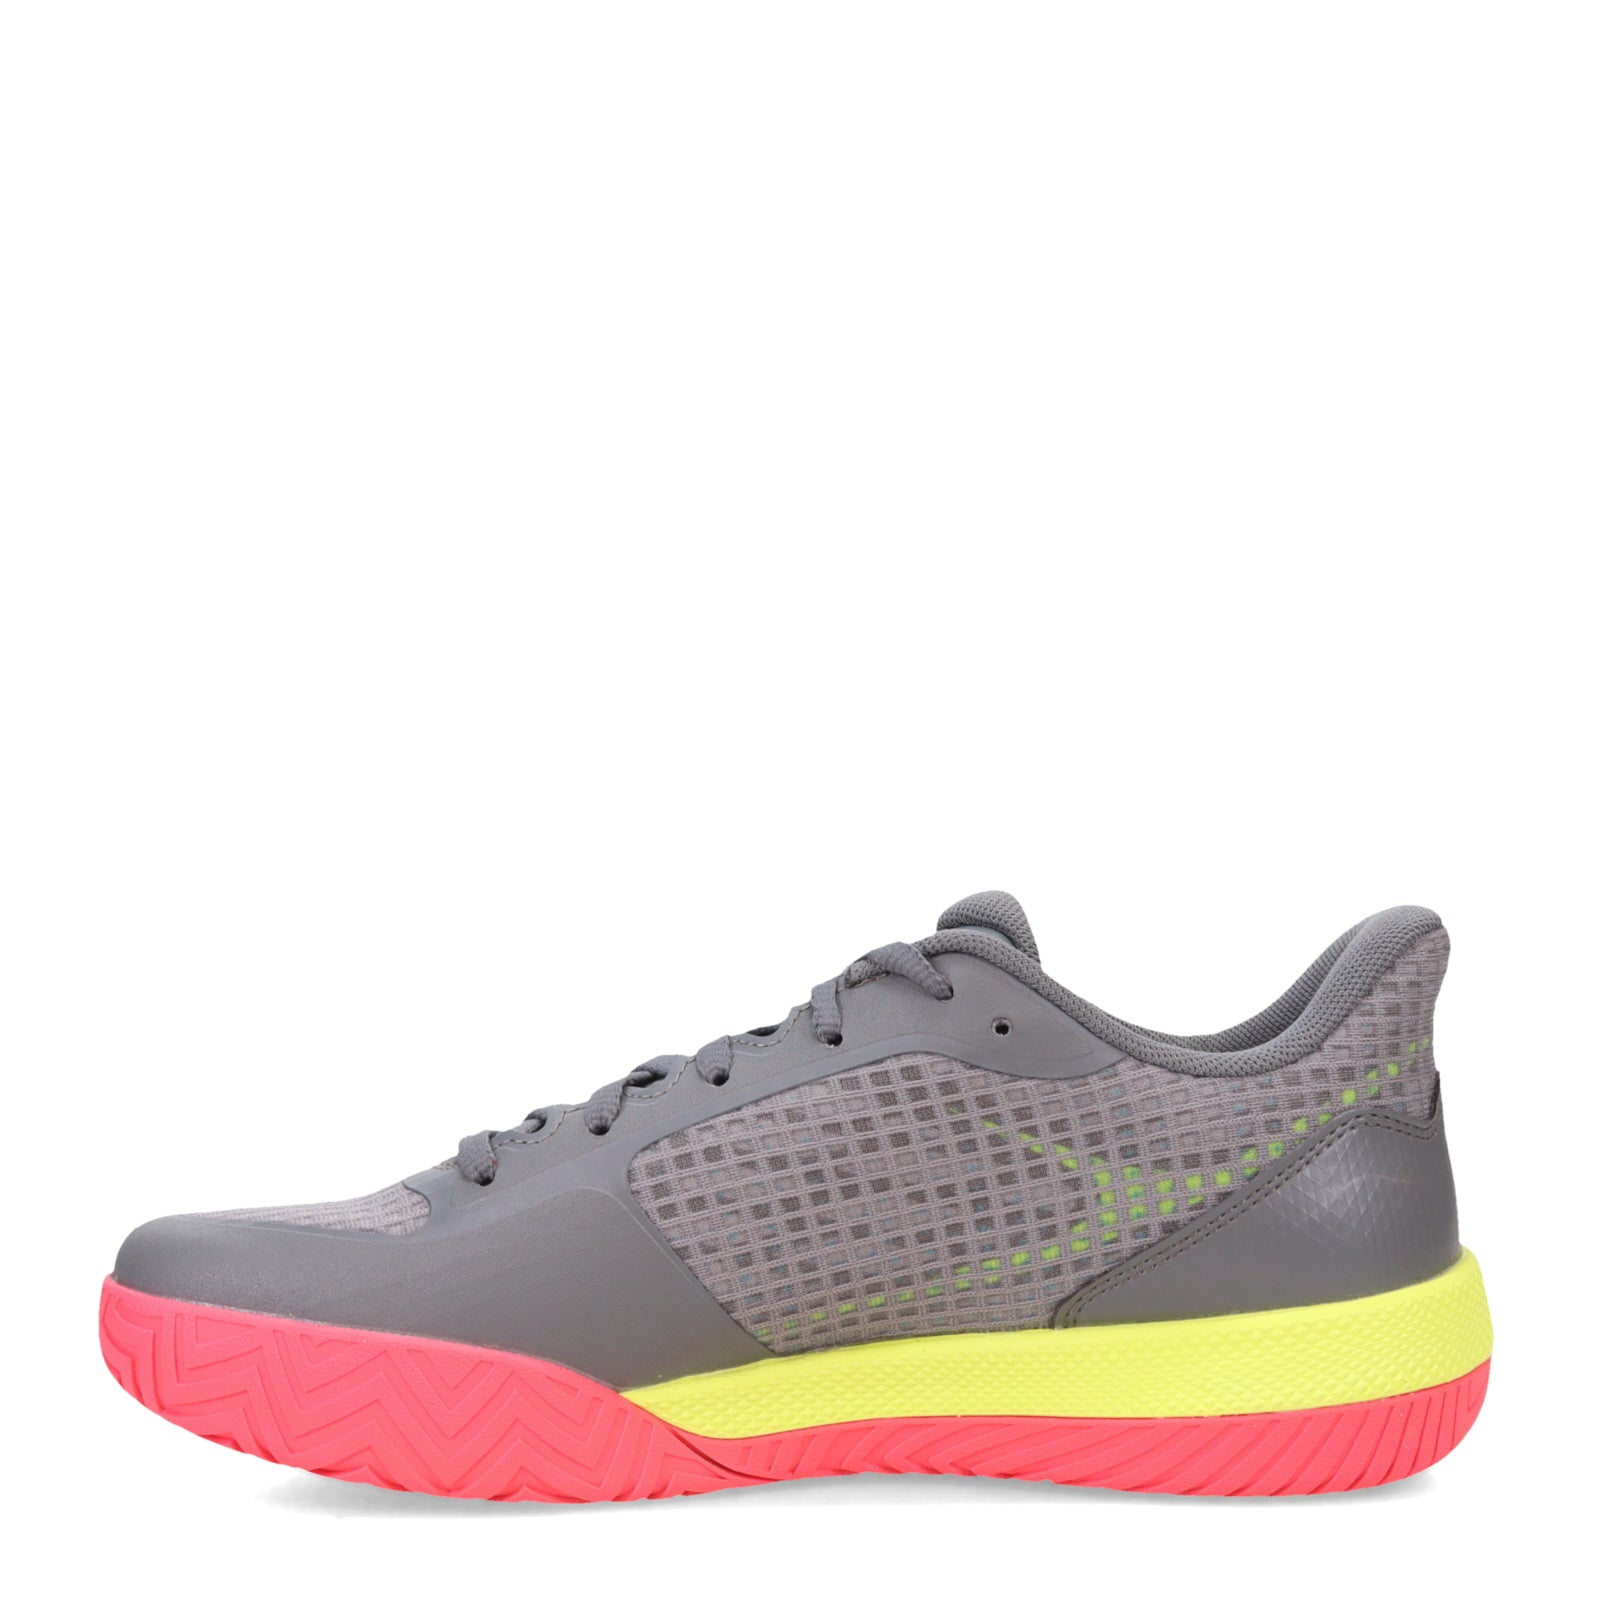 Women's Skechers, Relaxed Fit: Viper Court Pro - Arch Fit Pickleball Shoe